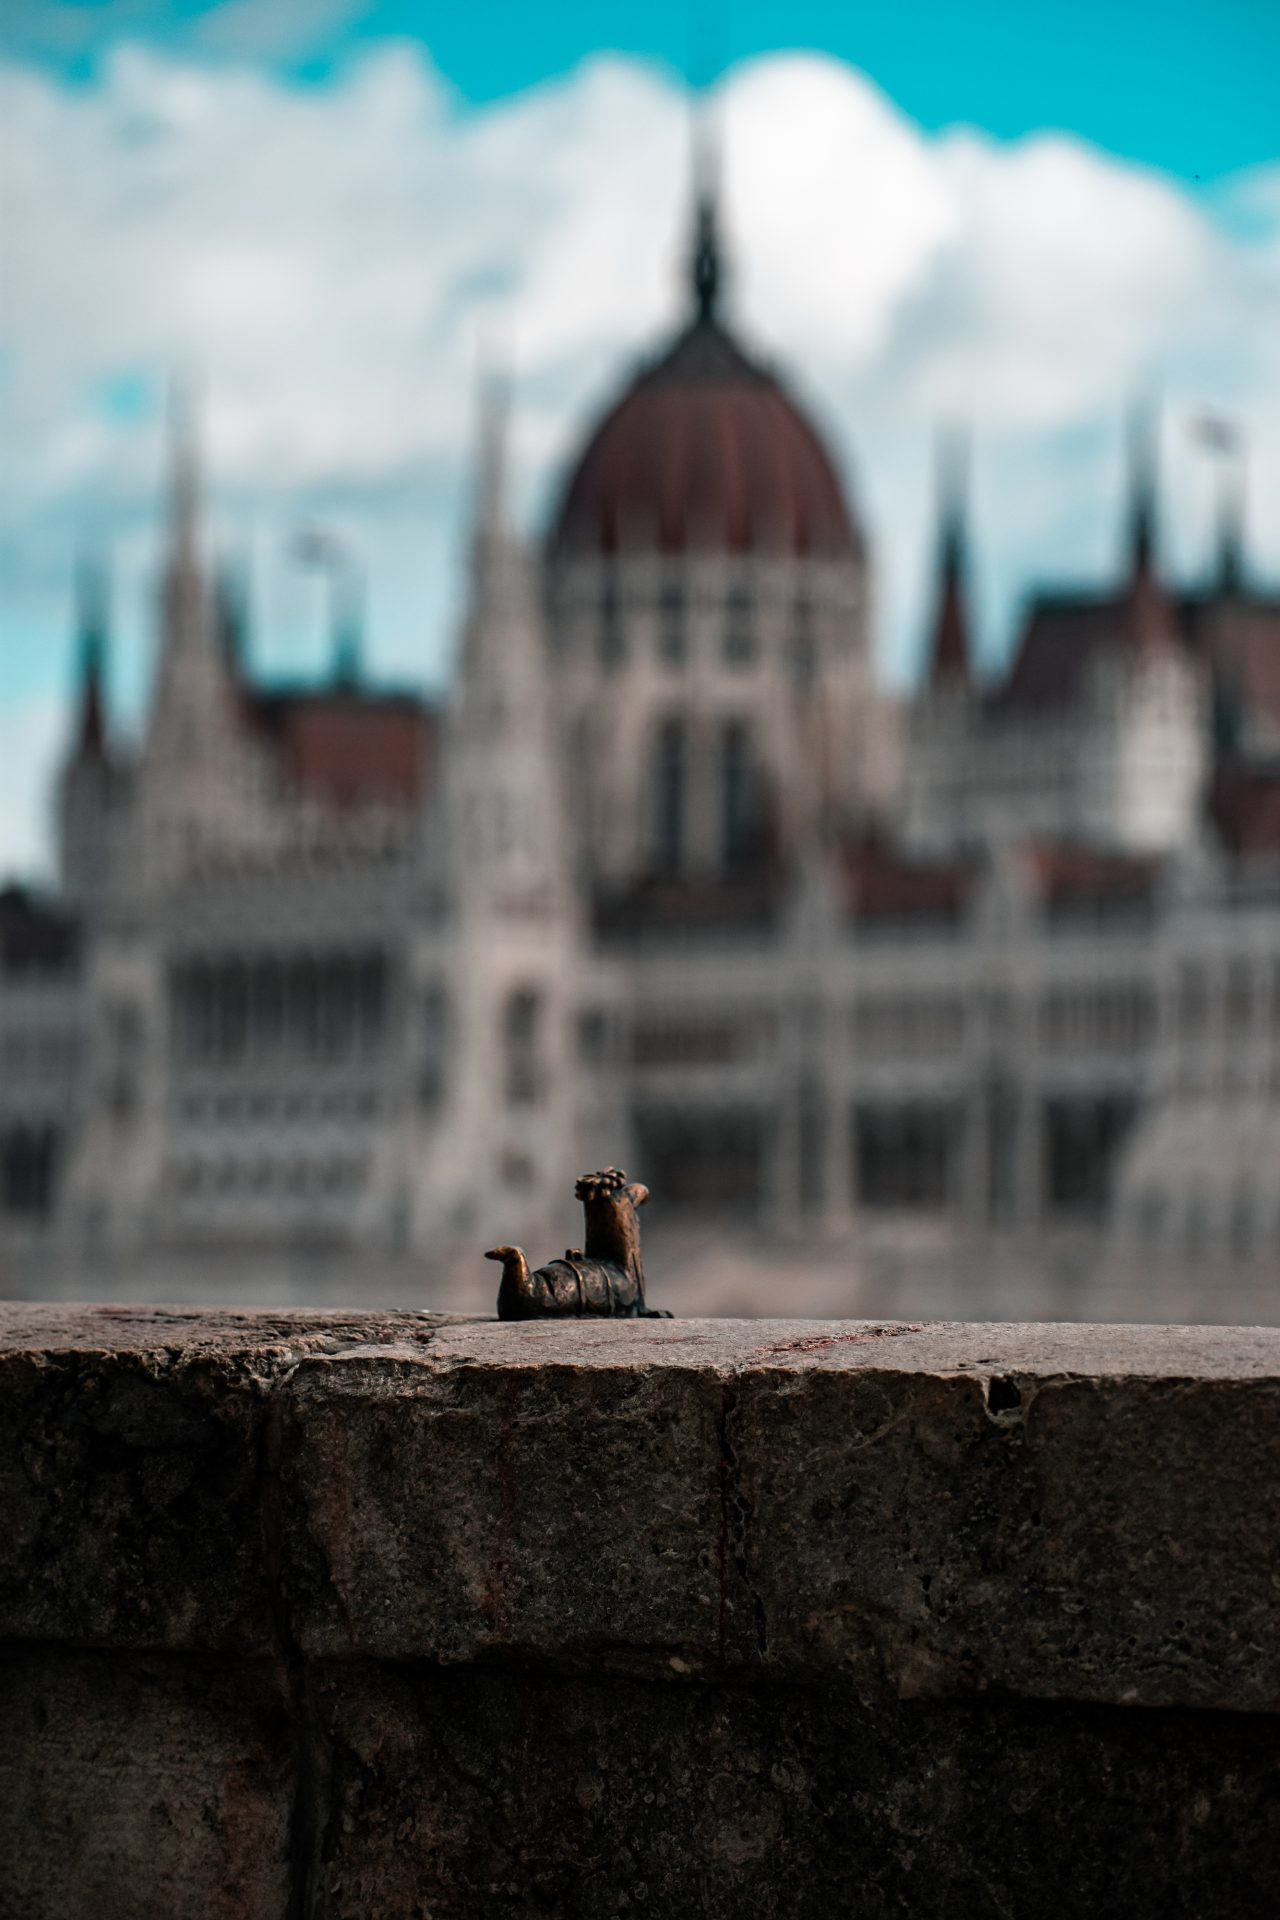 hungarian parliament in the background